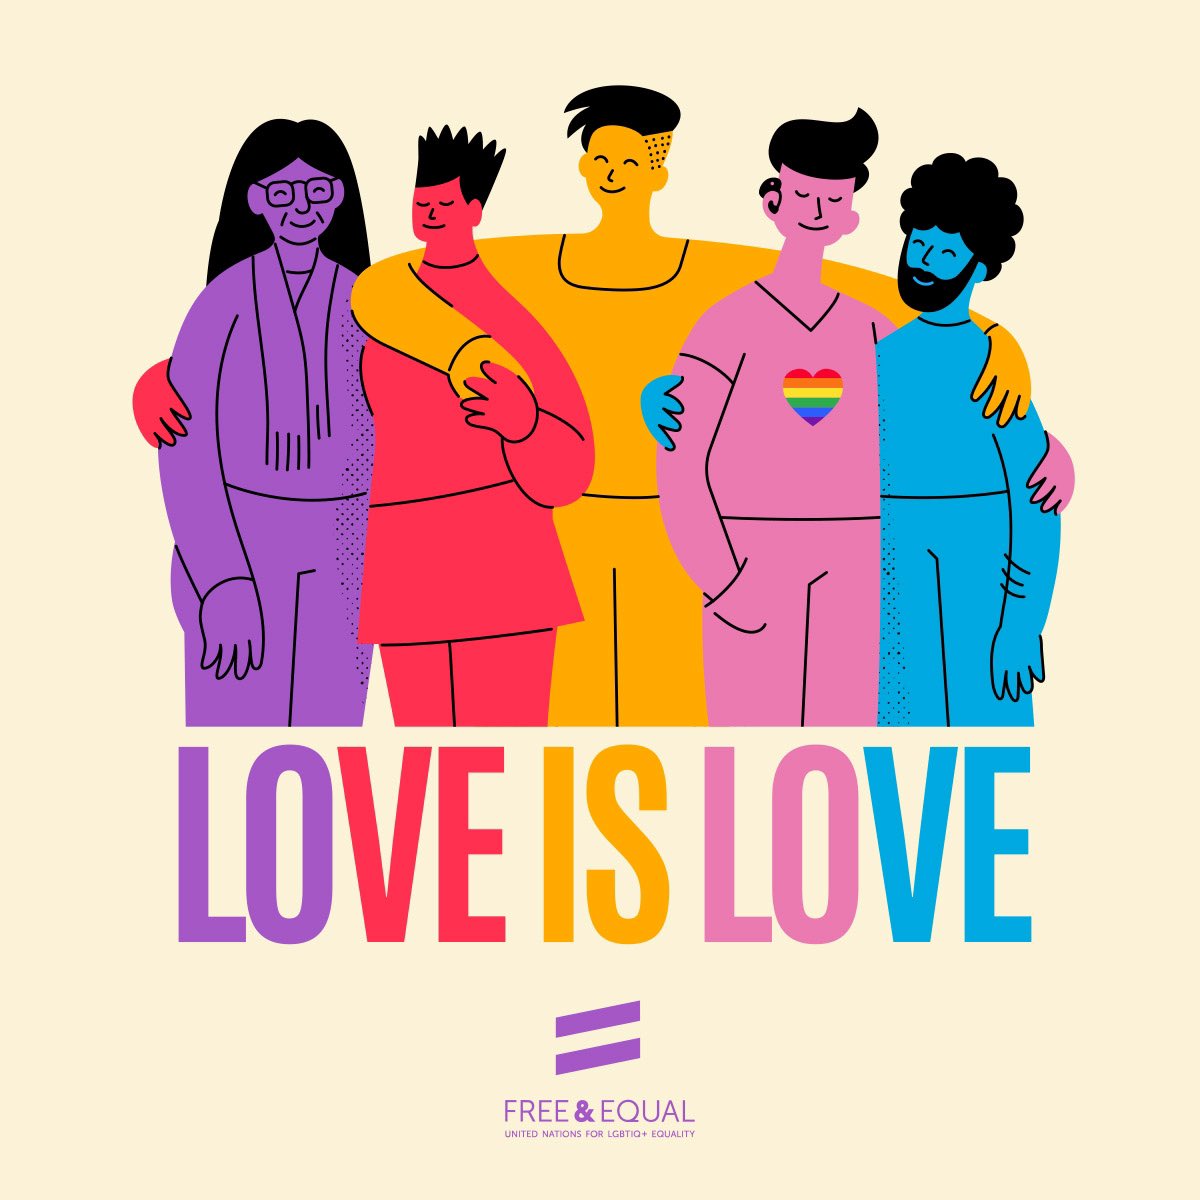 Tweet possible: Today is the International Day Against Homophobia, Biphobia, and Transphobia (IDAHOBIT)! Let’s celebrate #love in all its beautiful forms! #LGBTQI+ #IDAHOBIT2024 @UNCambodia